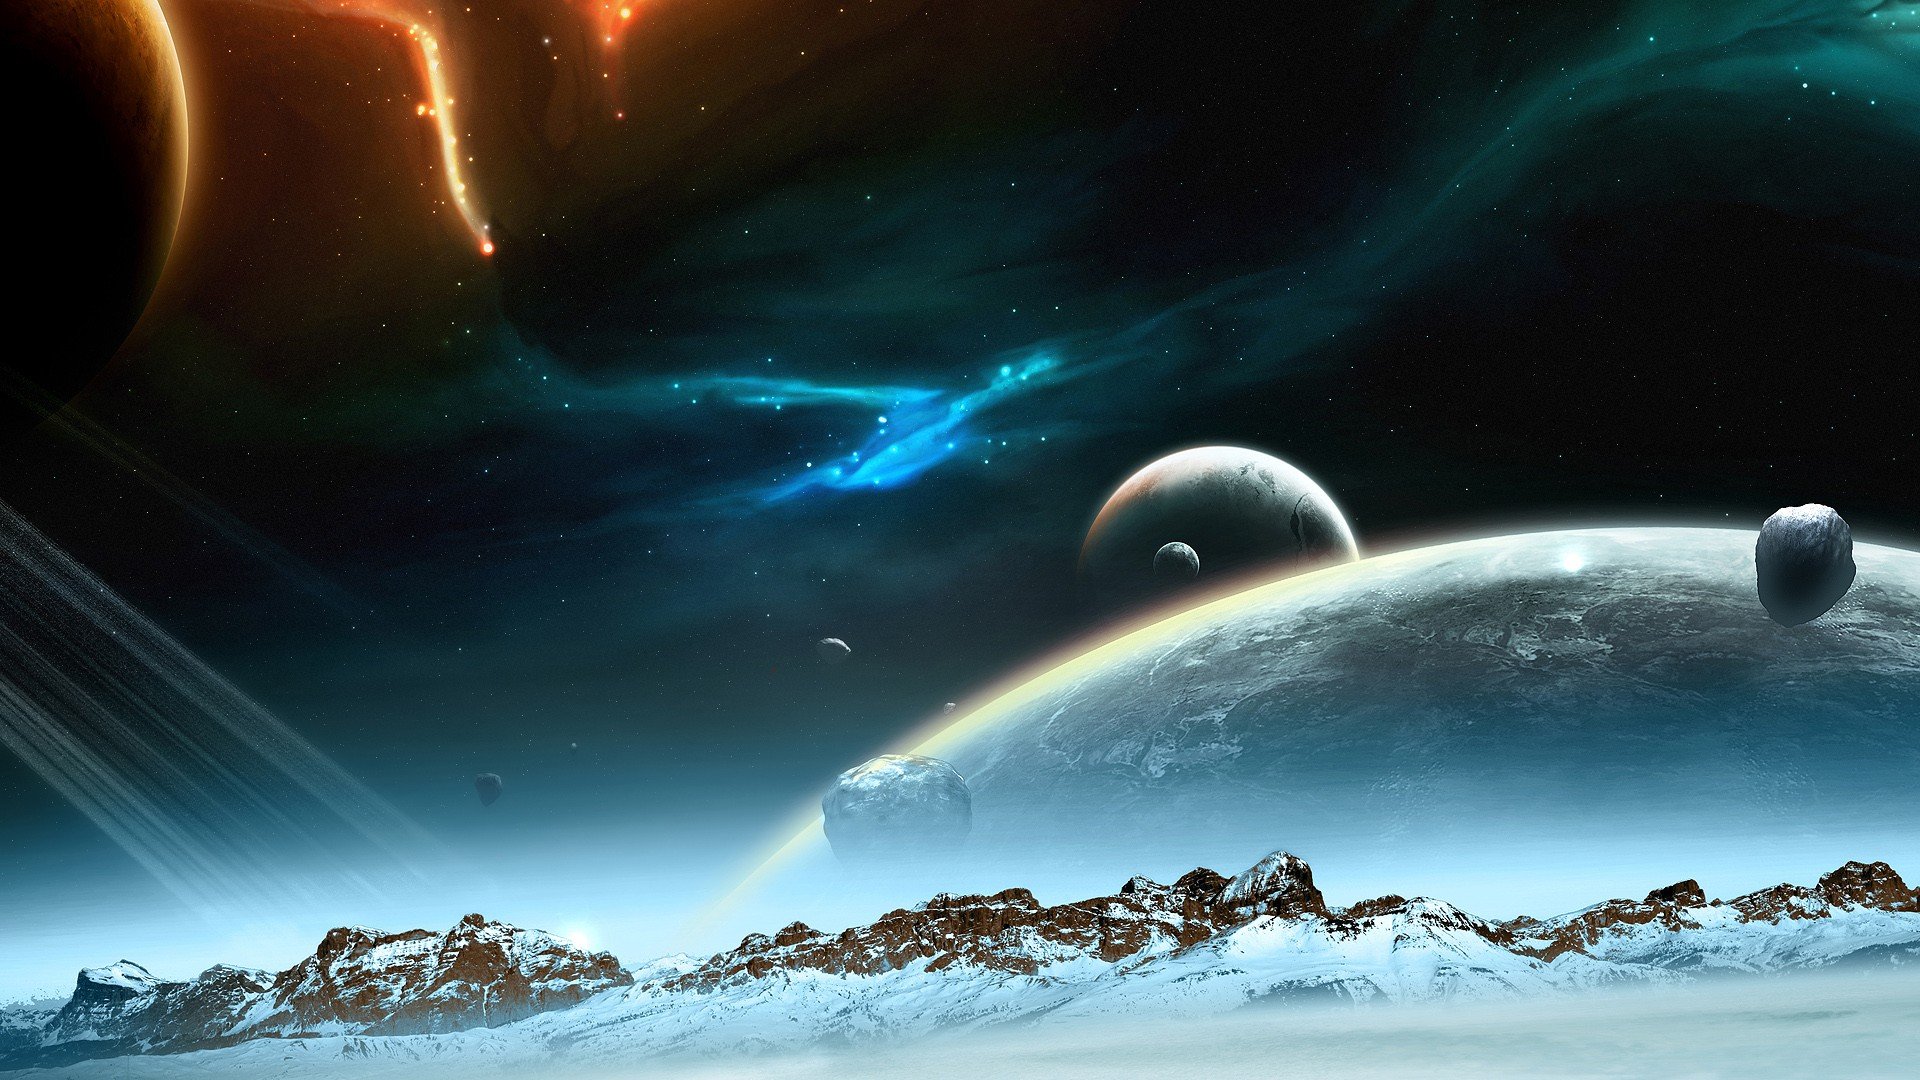 Space Planet Landscape Universe Night Sky Hd Wallpapers Desktop And Mobile Images And Photos 5488